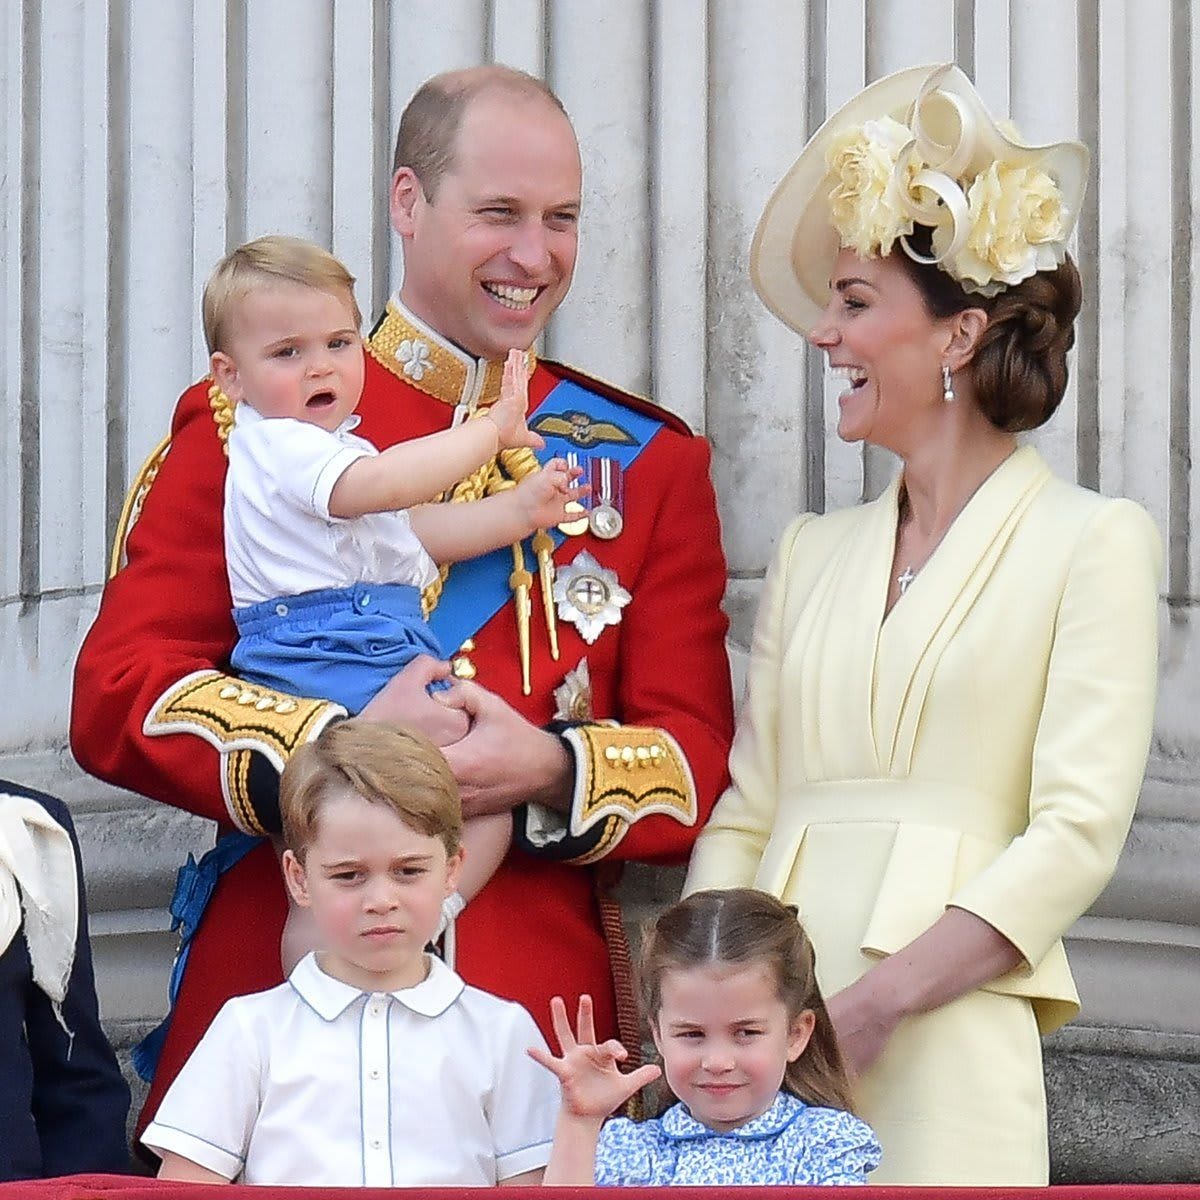 Prince William and Princess Kate Middleton with their kids Louis, Charlotte and George